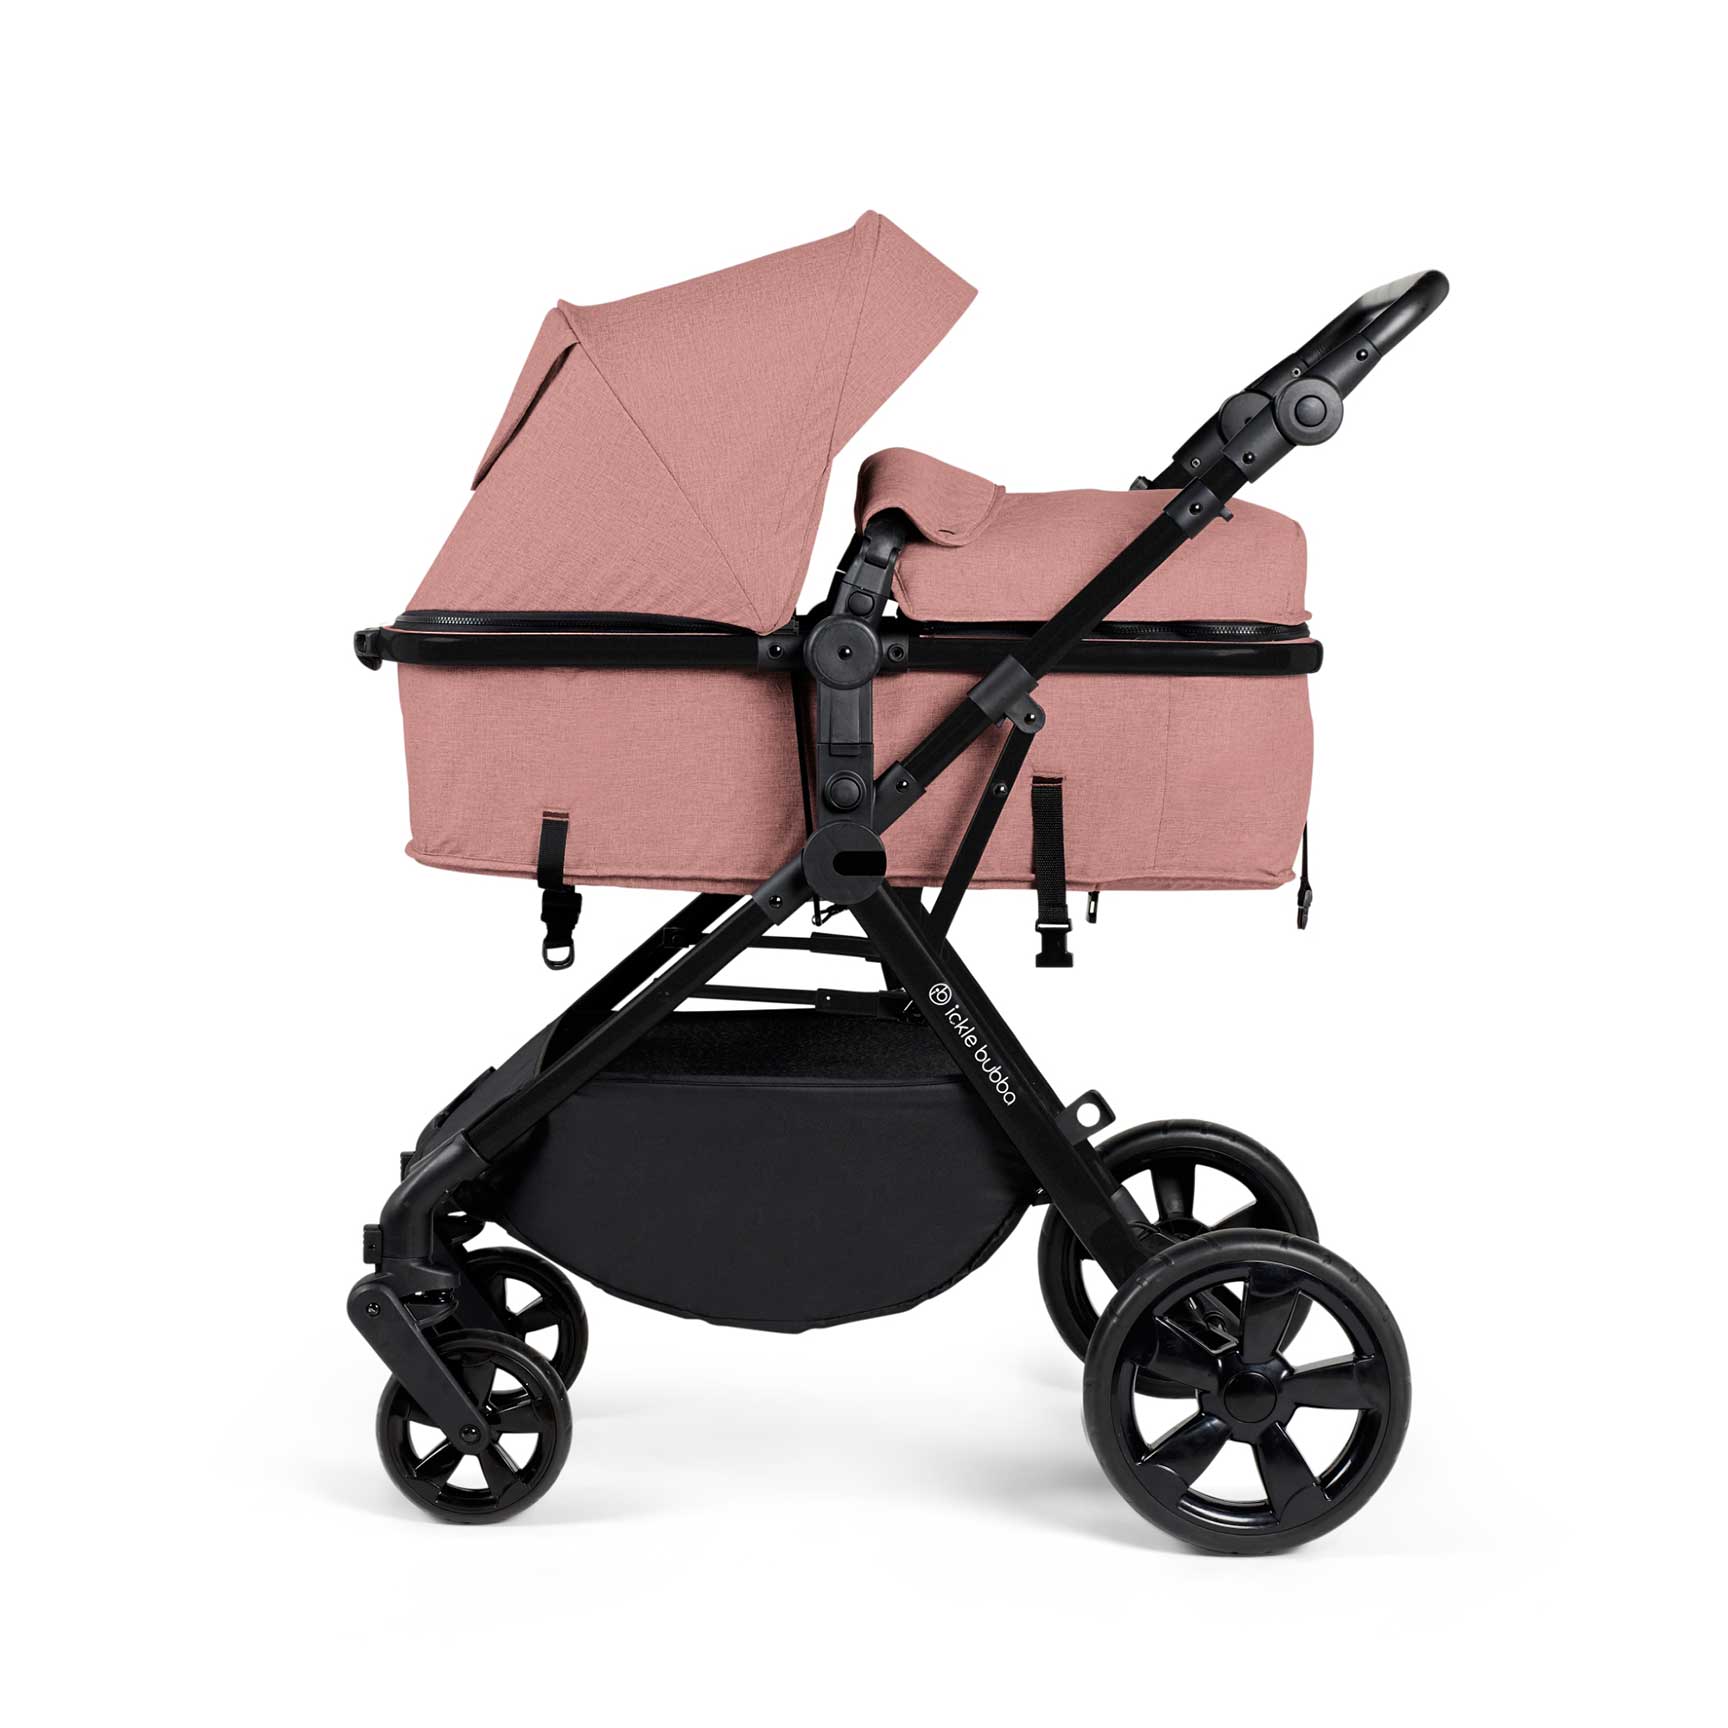 Ickle Bubba Comet All-in-One I-Size Travel System with Isofix Base in Dusty Pink Baby Prams 10-008-300-134 5056515025811